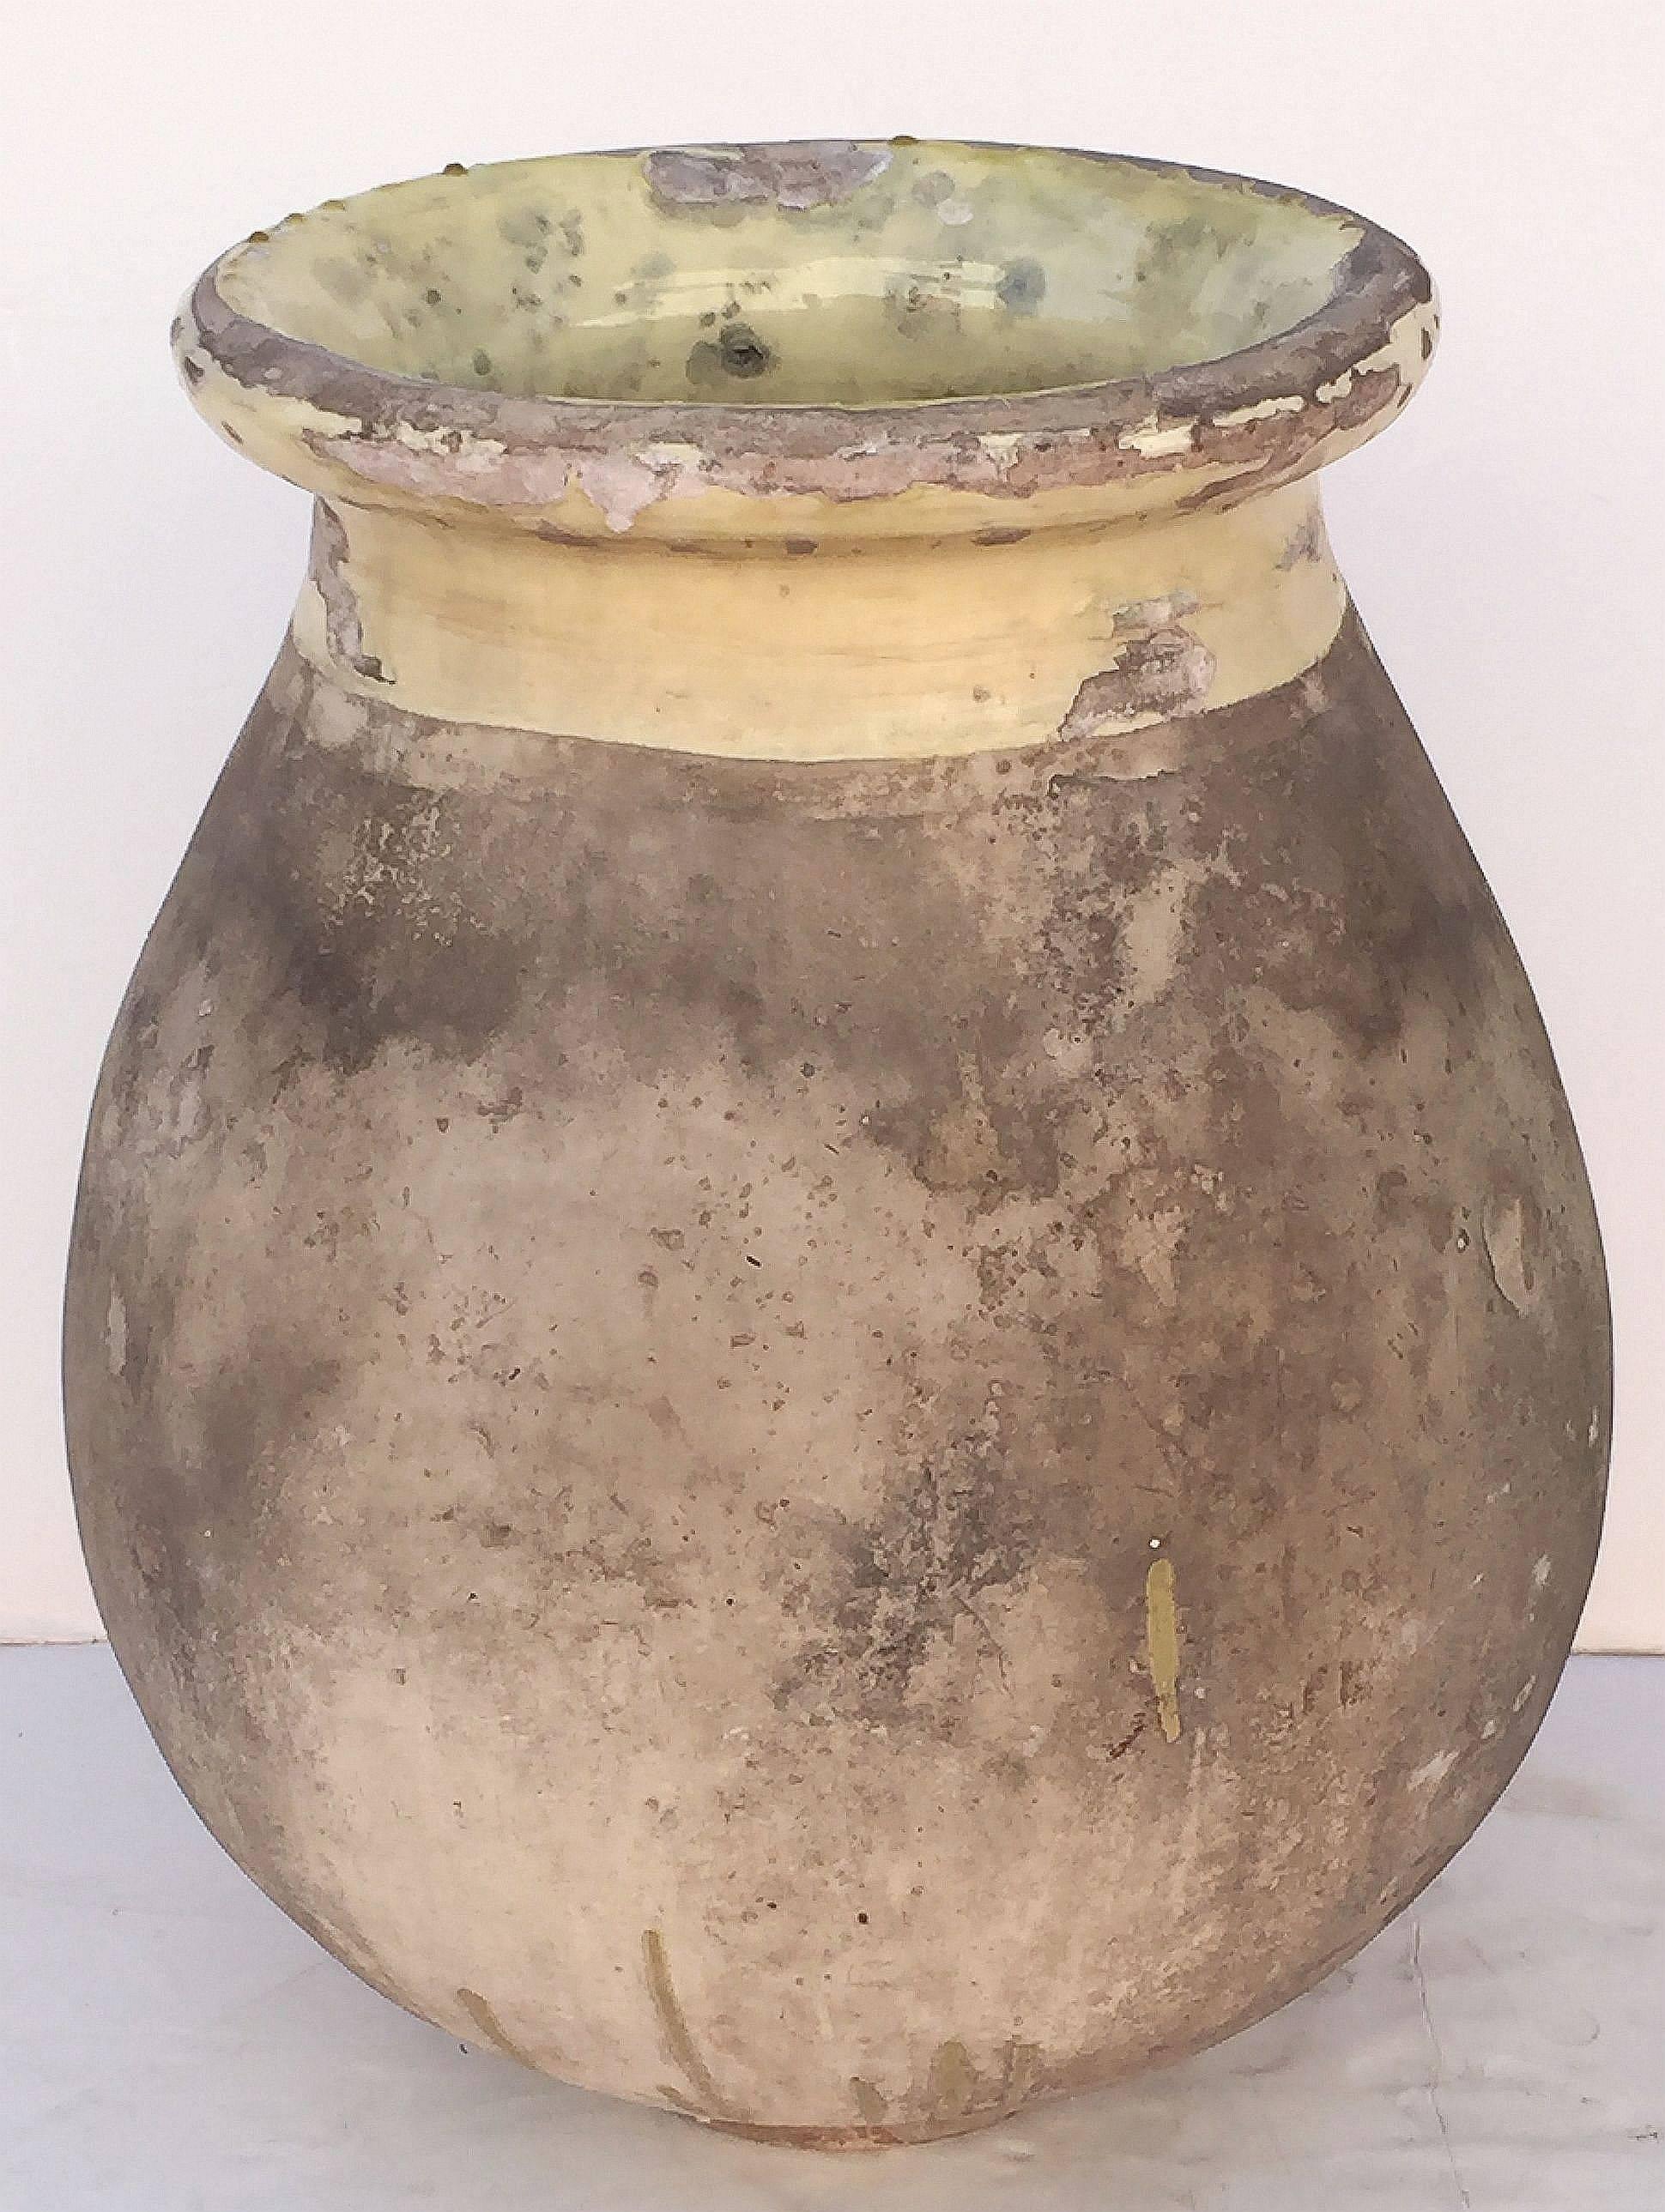 A handsome French garden pot or oil jar from the Biot, Alpes-Maritimes, region known as a pottery center from the 18th century onward.

Featuring a glazed rolled-edge top over a smooth, cylindrical body and functional as a garden ornament, fountain,